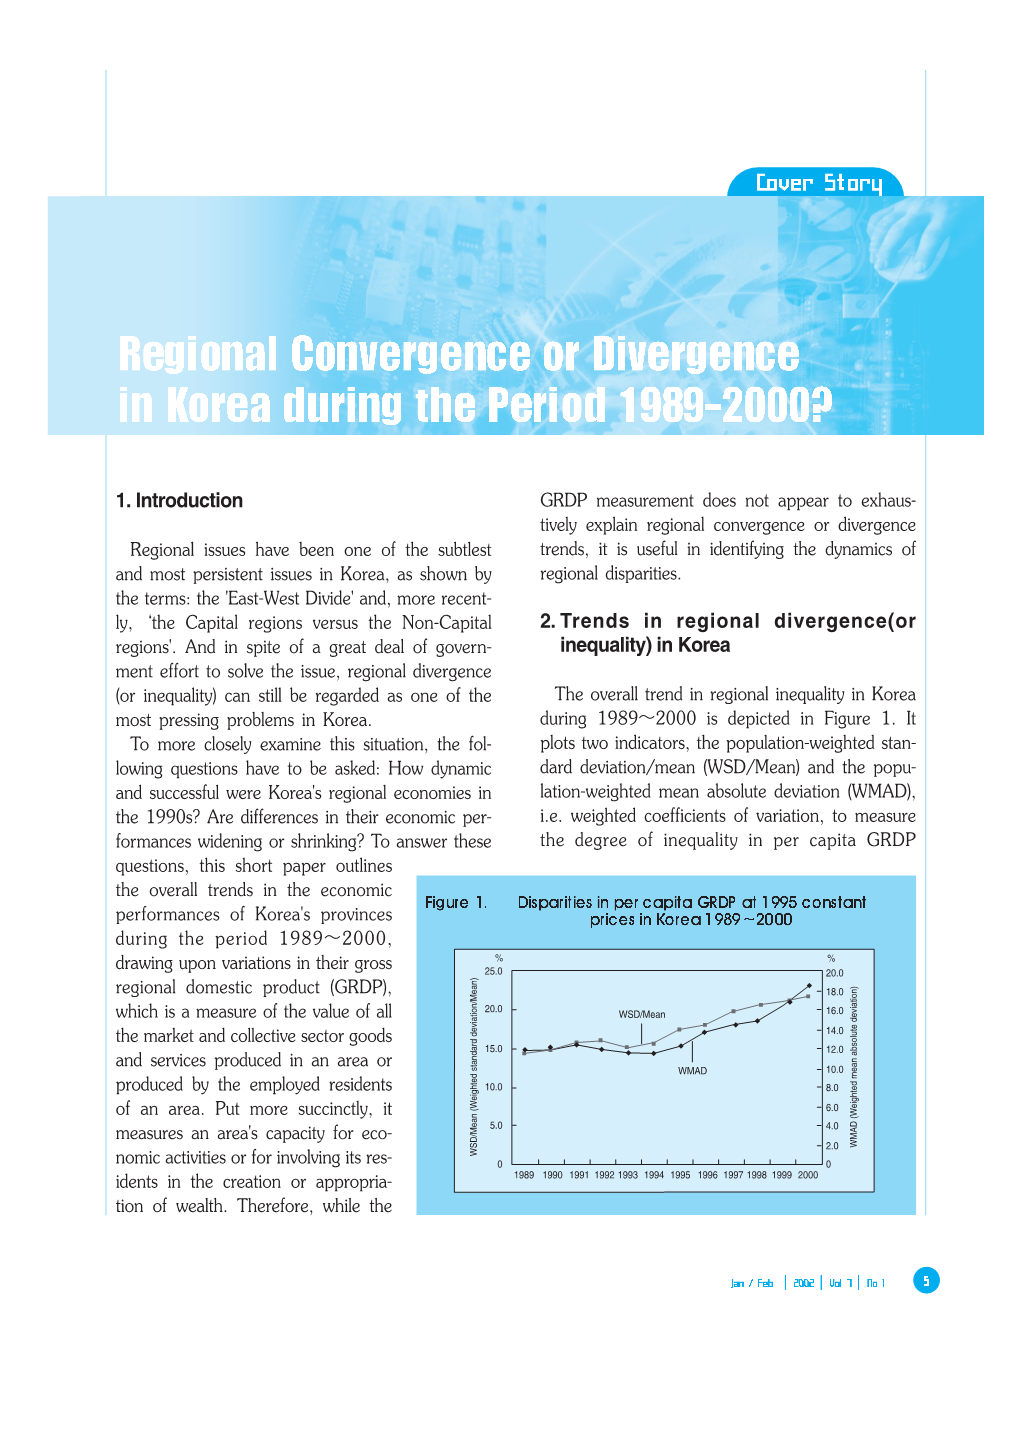 1. Introduction 2. Trends in Regional Divergence(Or Inequality) in Korea